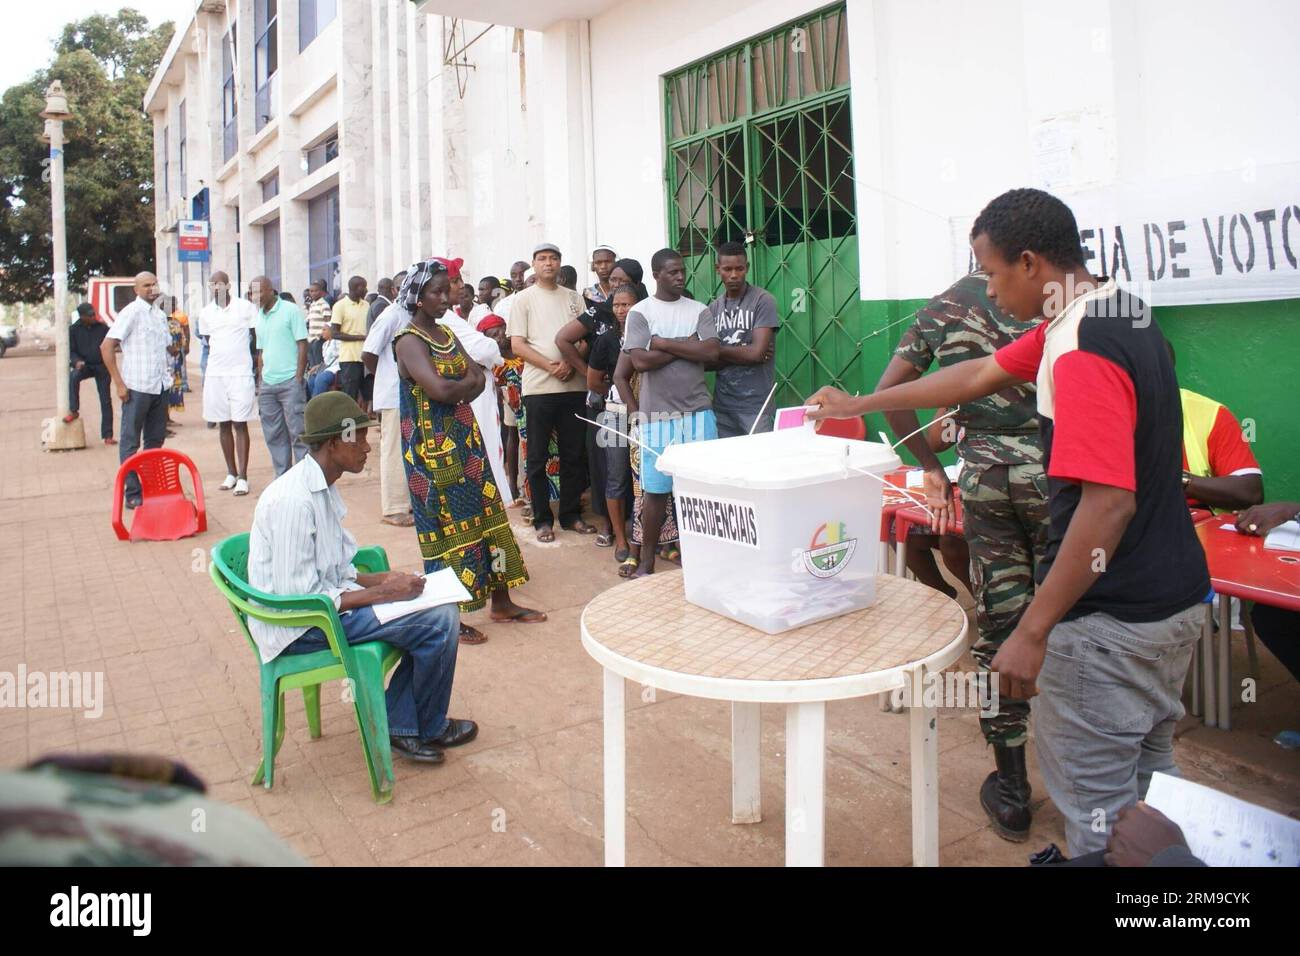 (140518) -- BISSAU, May 18, 2014 (Xinhua) -- Voters queue to cast their ballots at a polling station during the presidential elections run-off at Bissau, capital of Guinea Bissau, May 18, 2014. Guinea-Bissau held the first presidential and legislative elections on April 13 since a military coup upended the impoverished west African country in 2012.With no candidate won a majority in the first round, former Finance Minister Jose Mario Vaz and independent candidate Nuno Gomes Nabiam enter the second round of voting on Sunday. (Xinhua/Aliu Balde) GUINEA BISSAU-PRESIDENTIAL ELECTIONS-RUN-OFF PUBLI Stock Photo